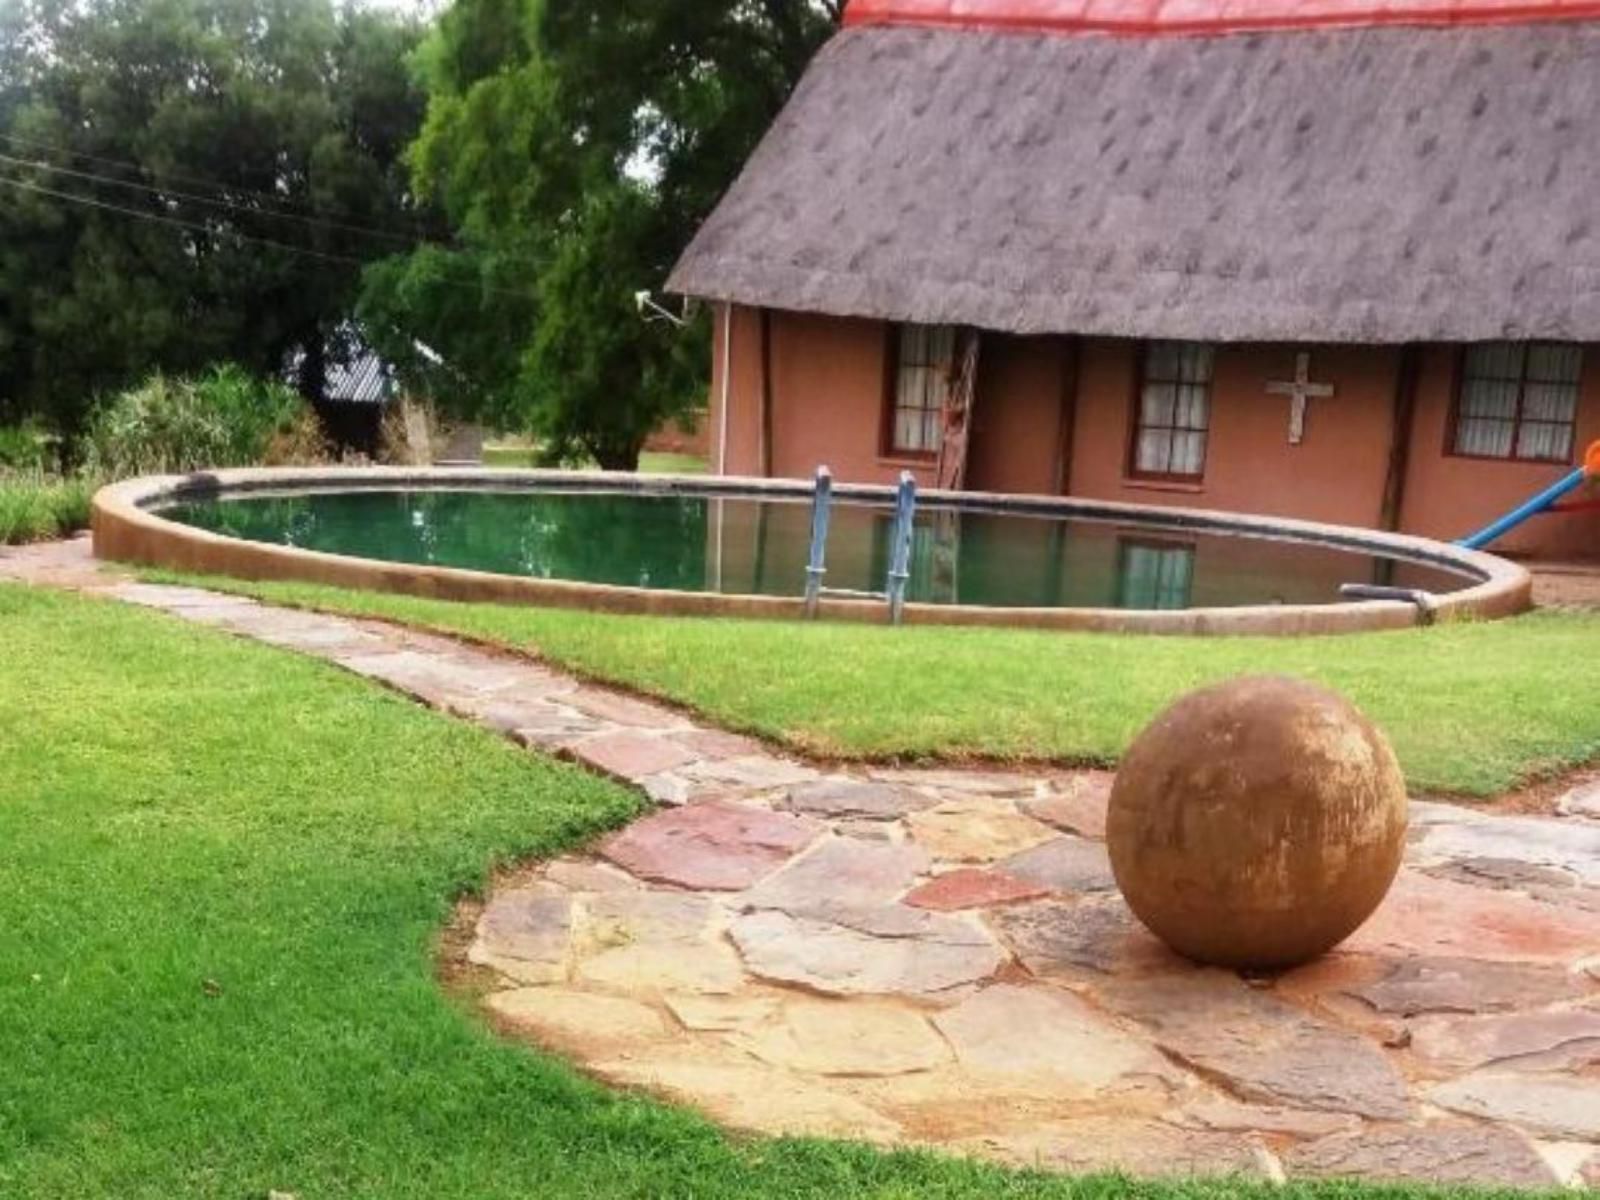 Hadida Guesthouse Swartruggens North West Province South Africa Ball, Sport, Ball Game